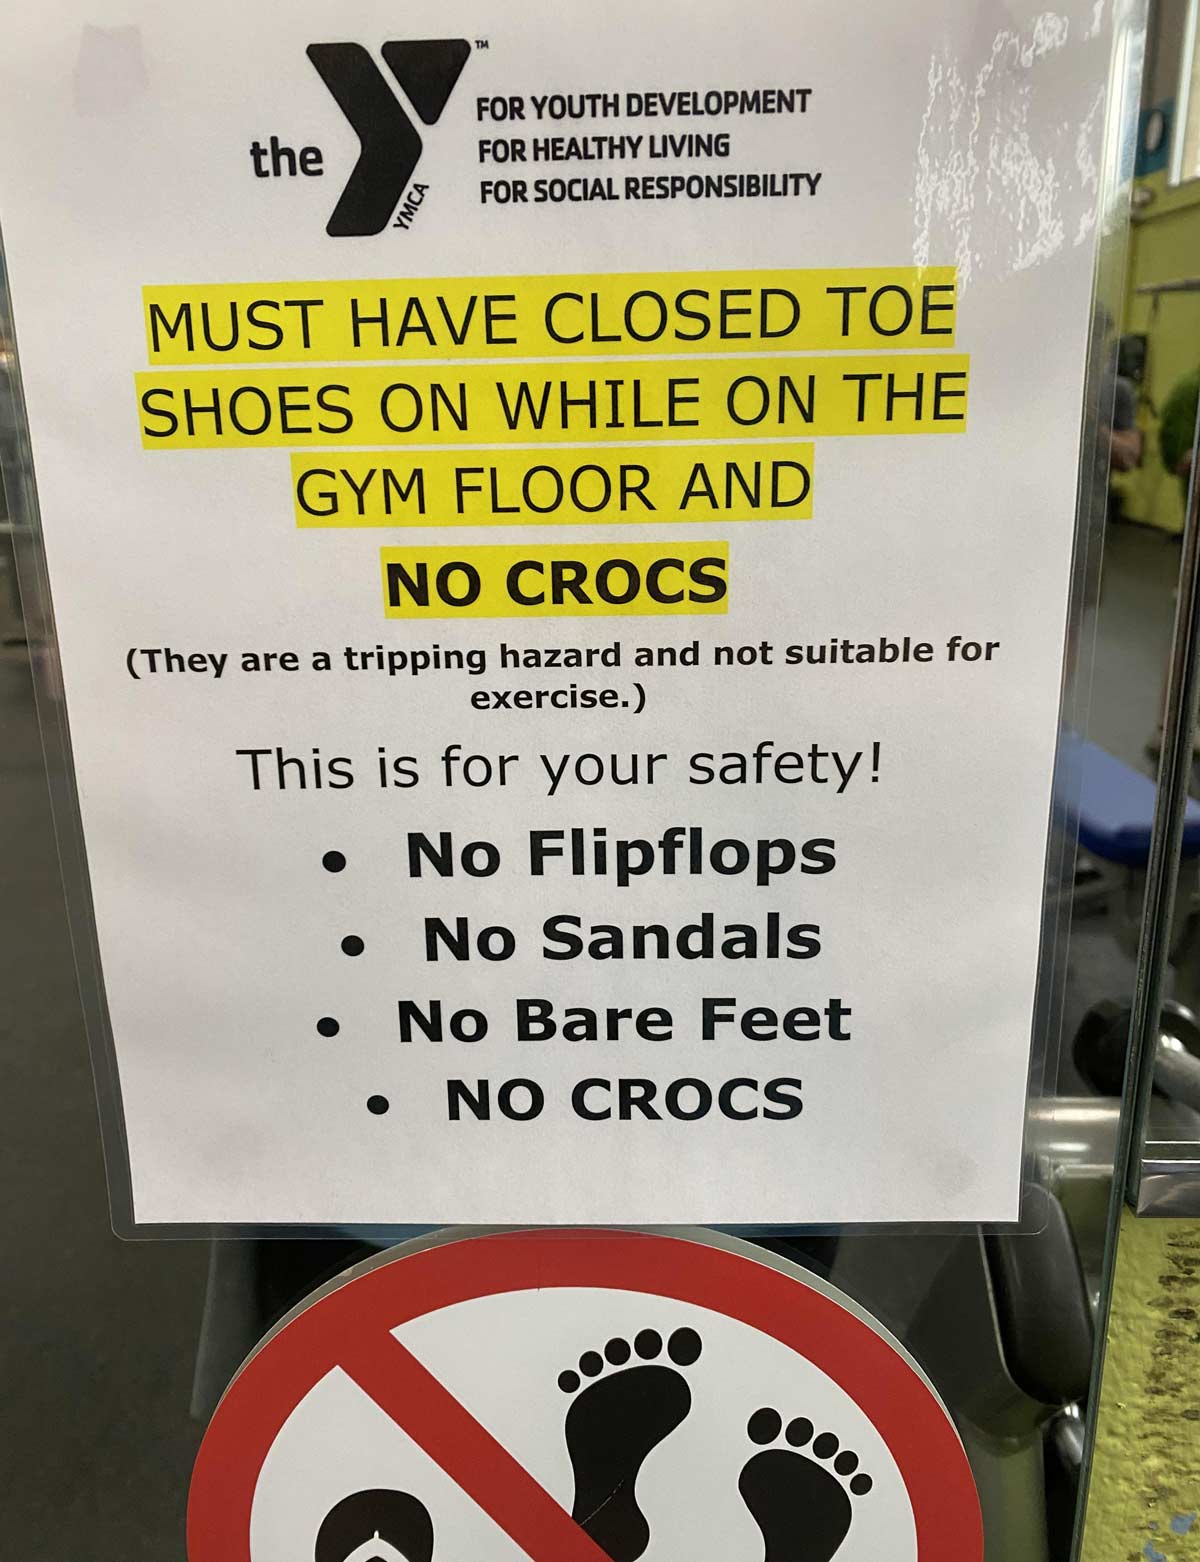 Apparently enough people wear crocs to the Y that they have to say it twice